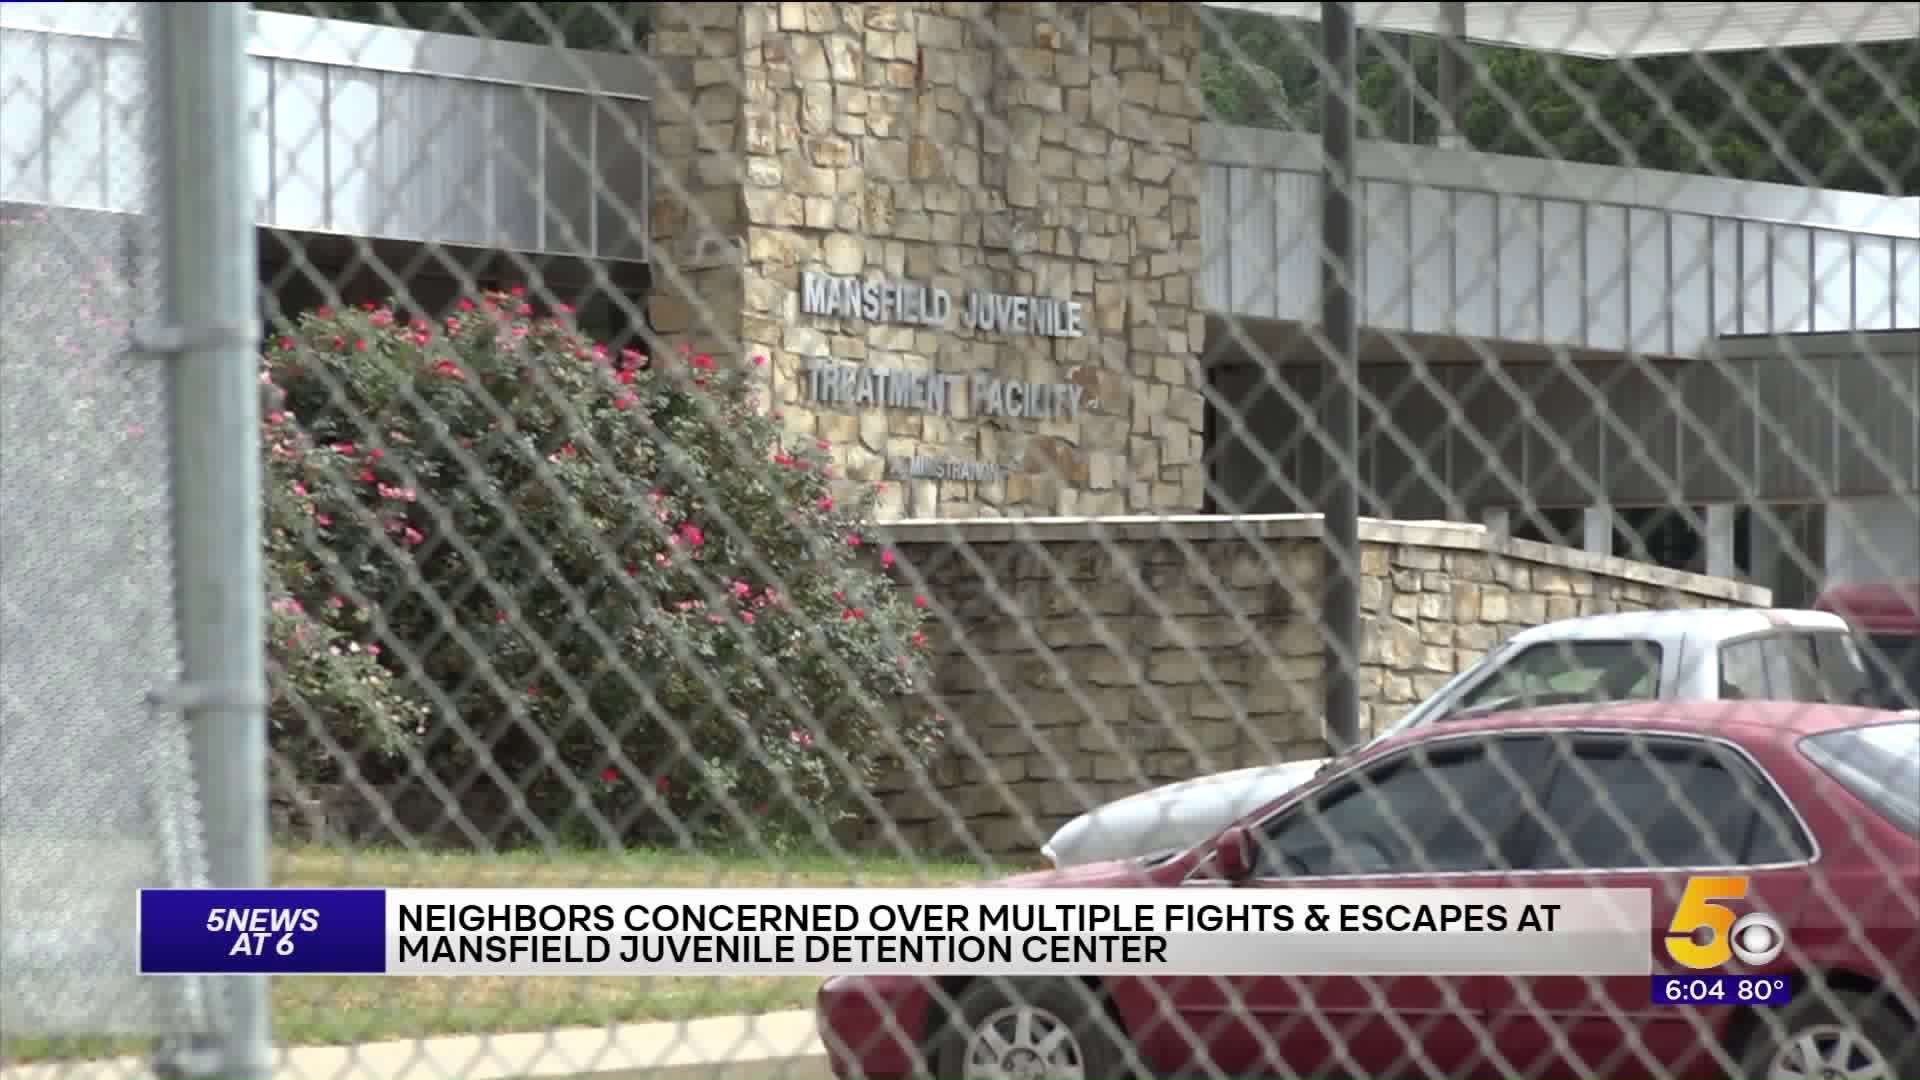 Neighbors Concerned About Mulitple Issues At Mansfield Juvenile Detention Center